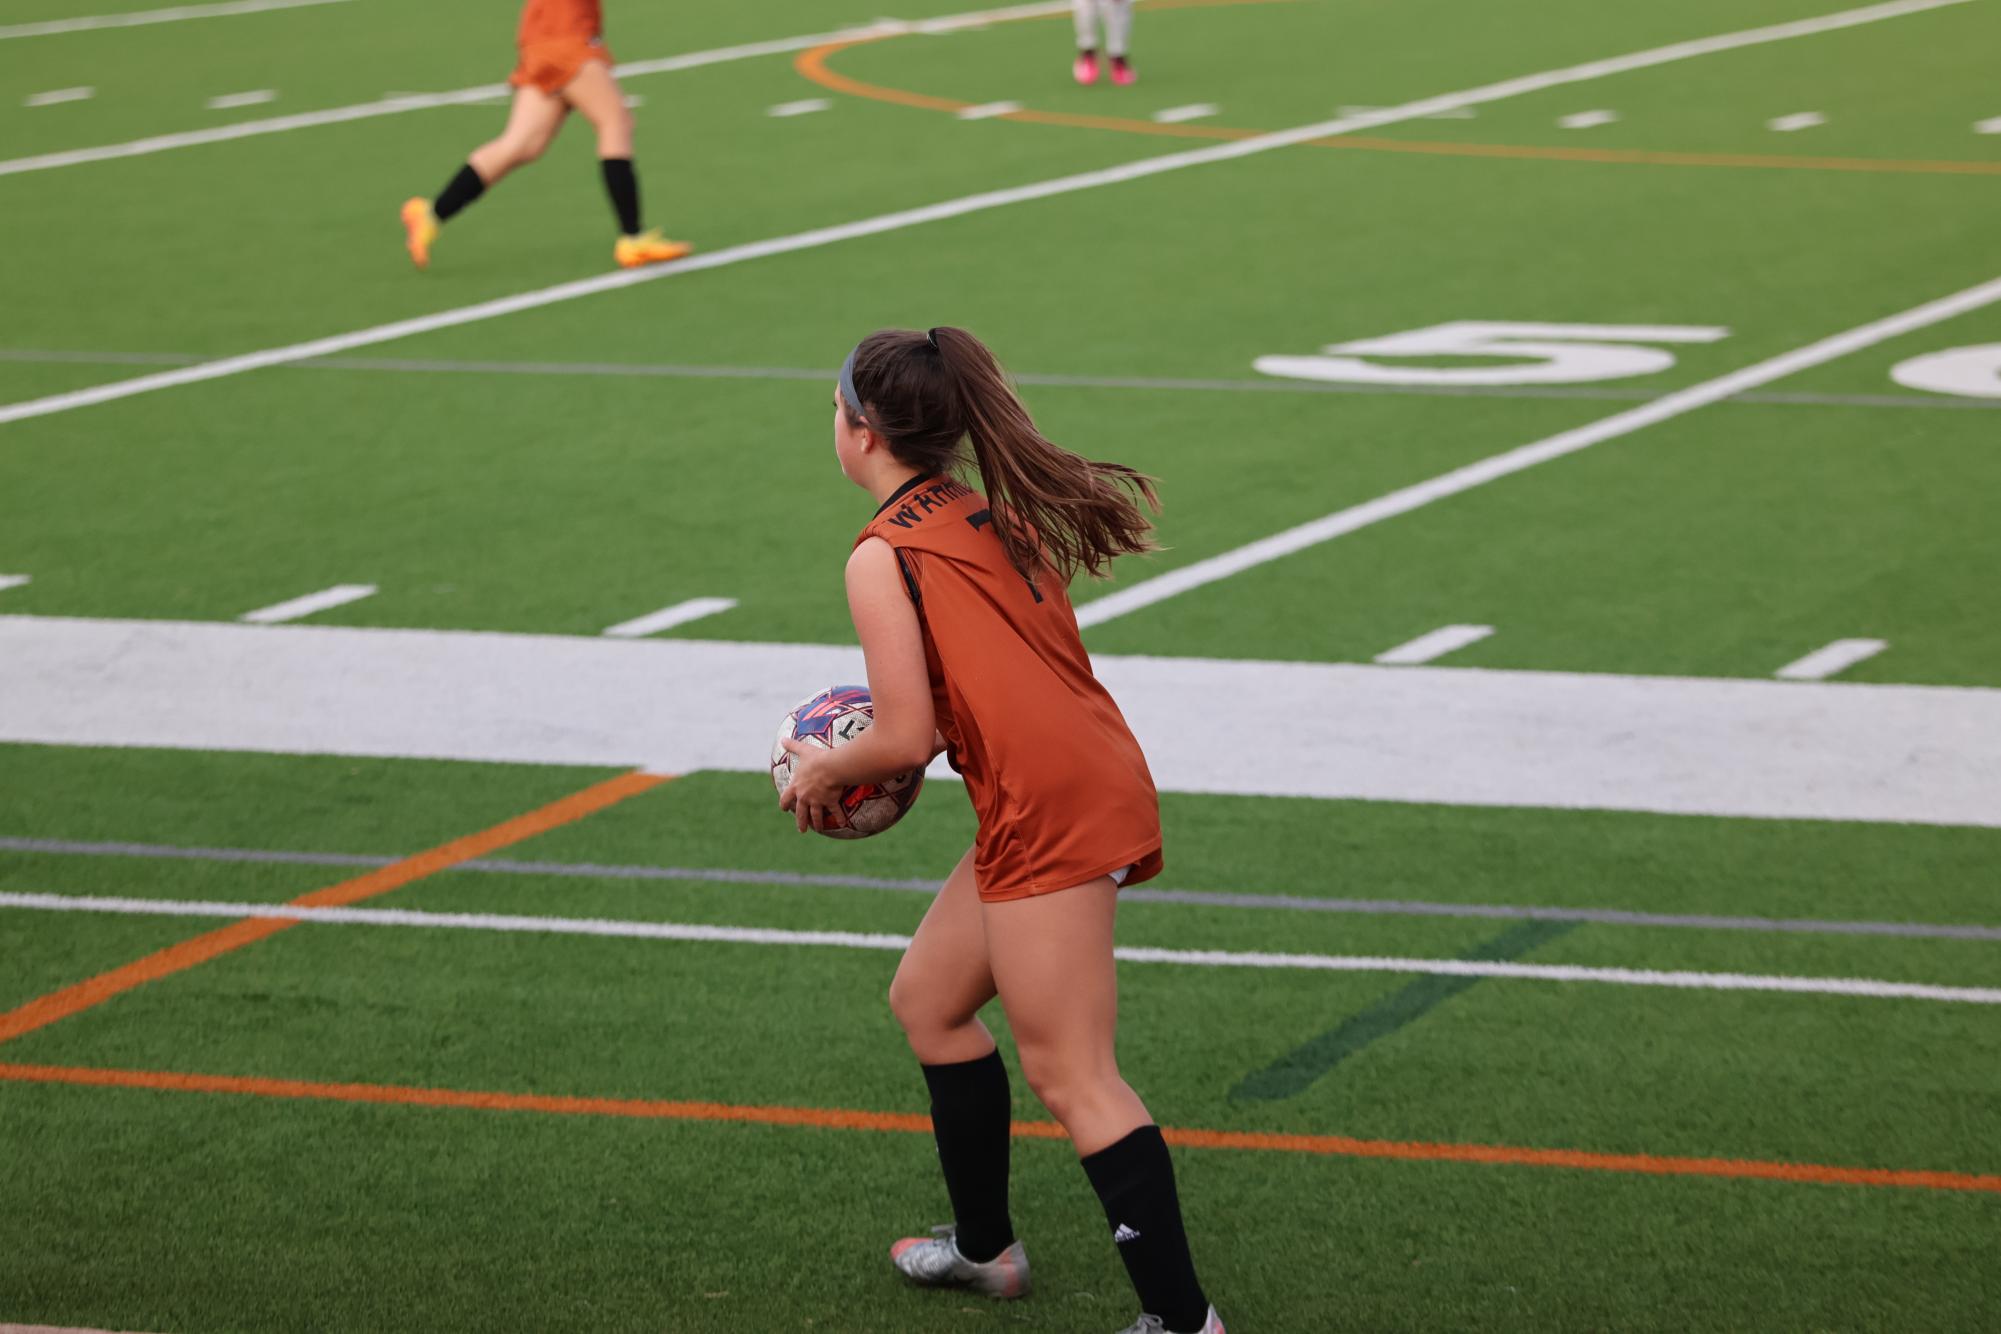 JV+Girls+Soccer+Concludes+Season+With+1-1+Draw+Against+Vandegrift